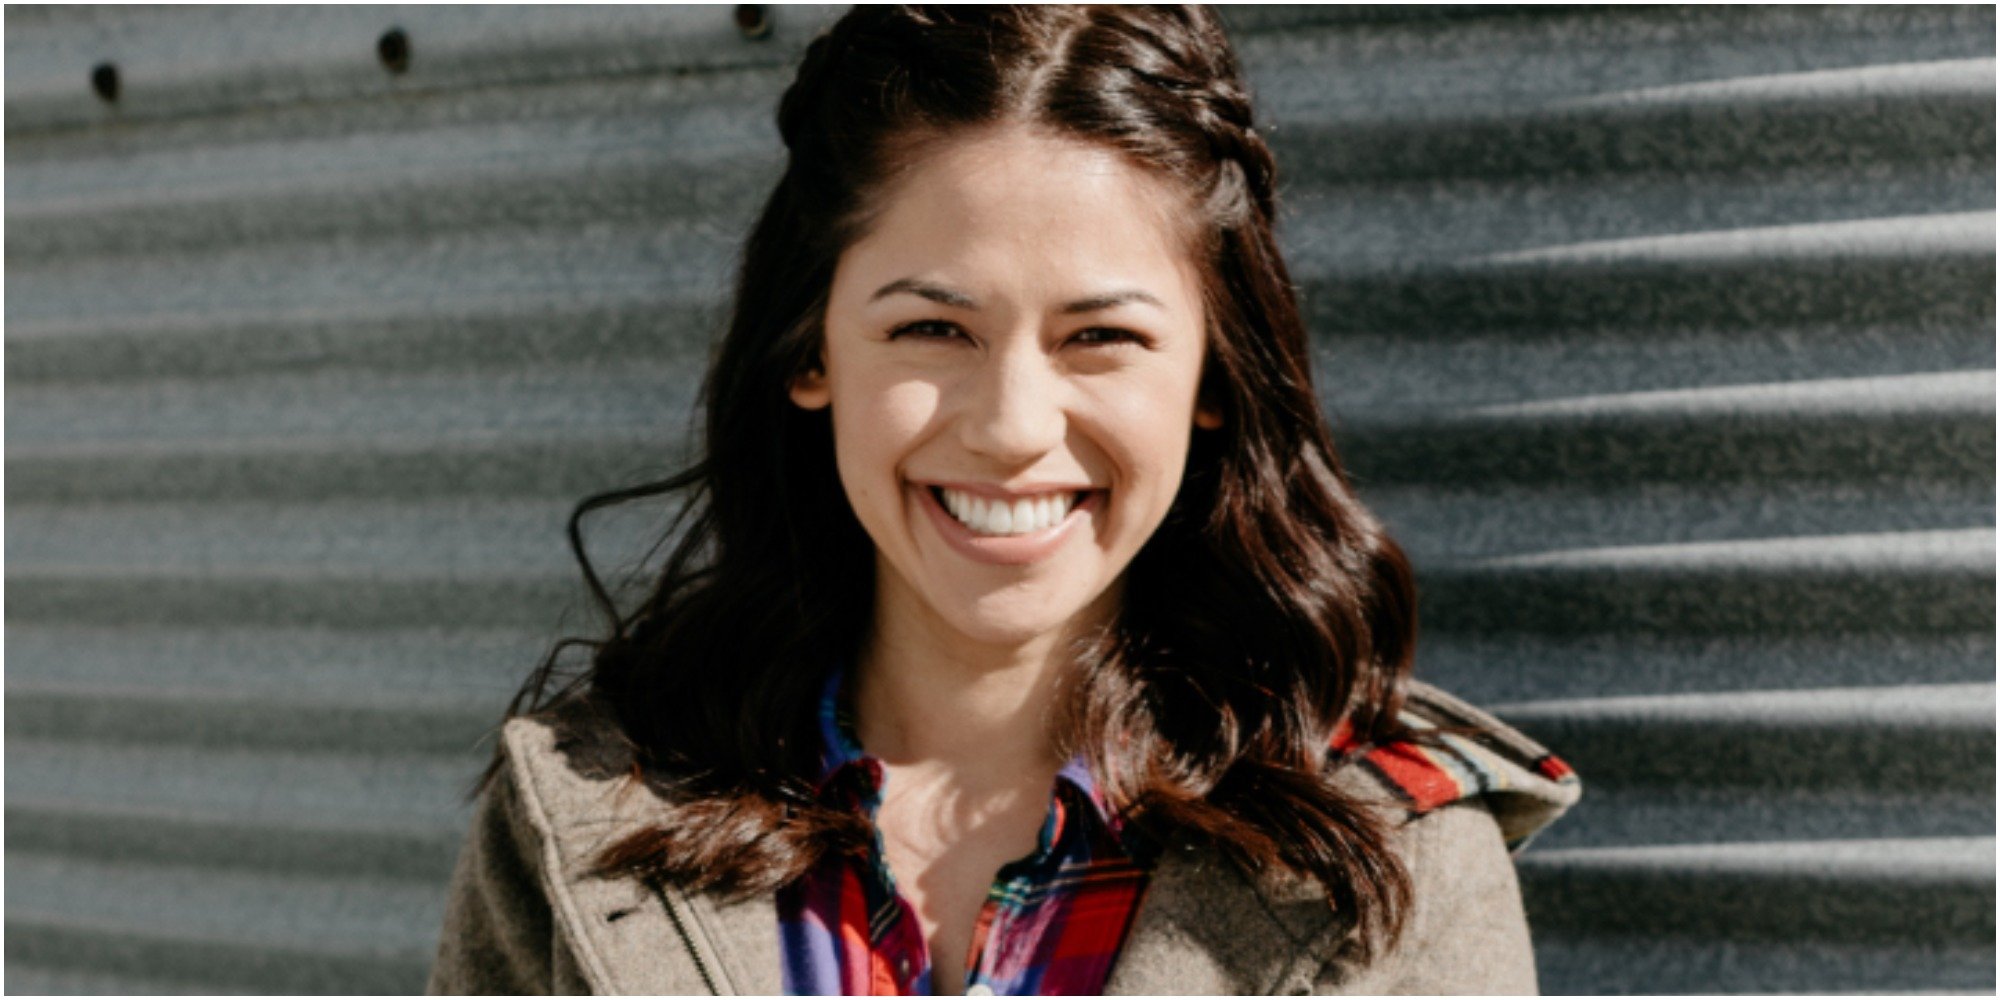 Molly Yeh smiles for the camera in a tan jacket.